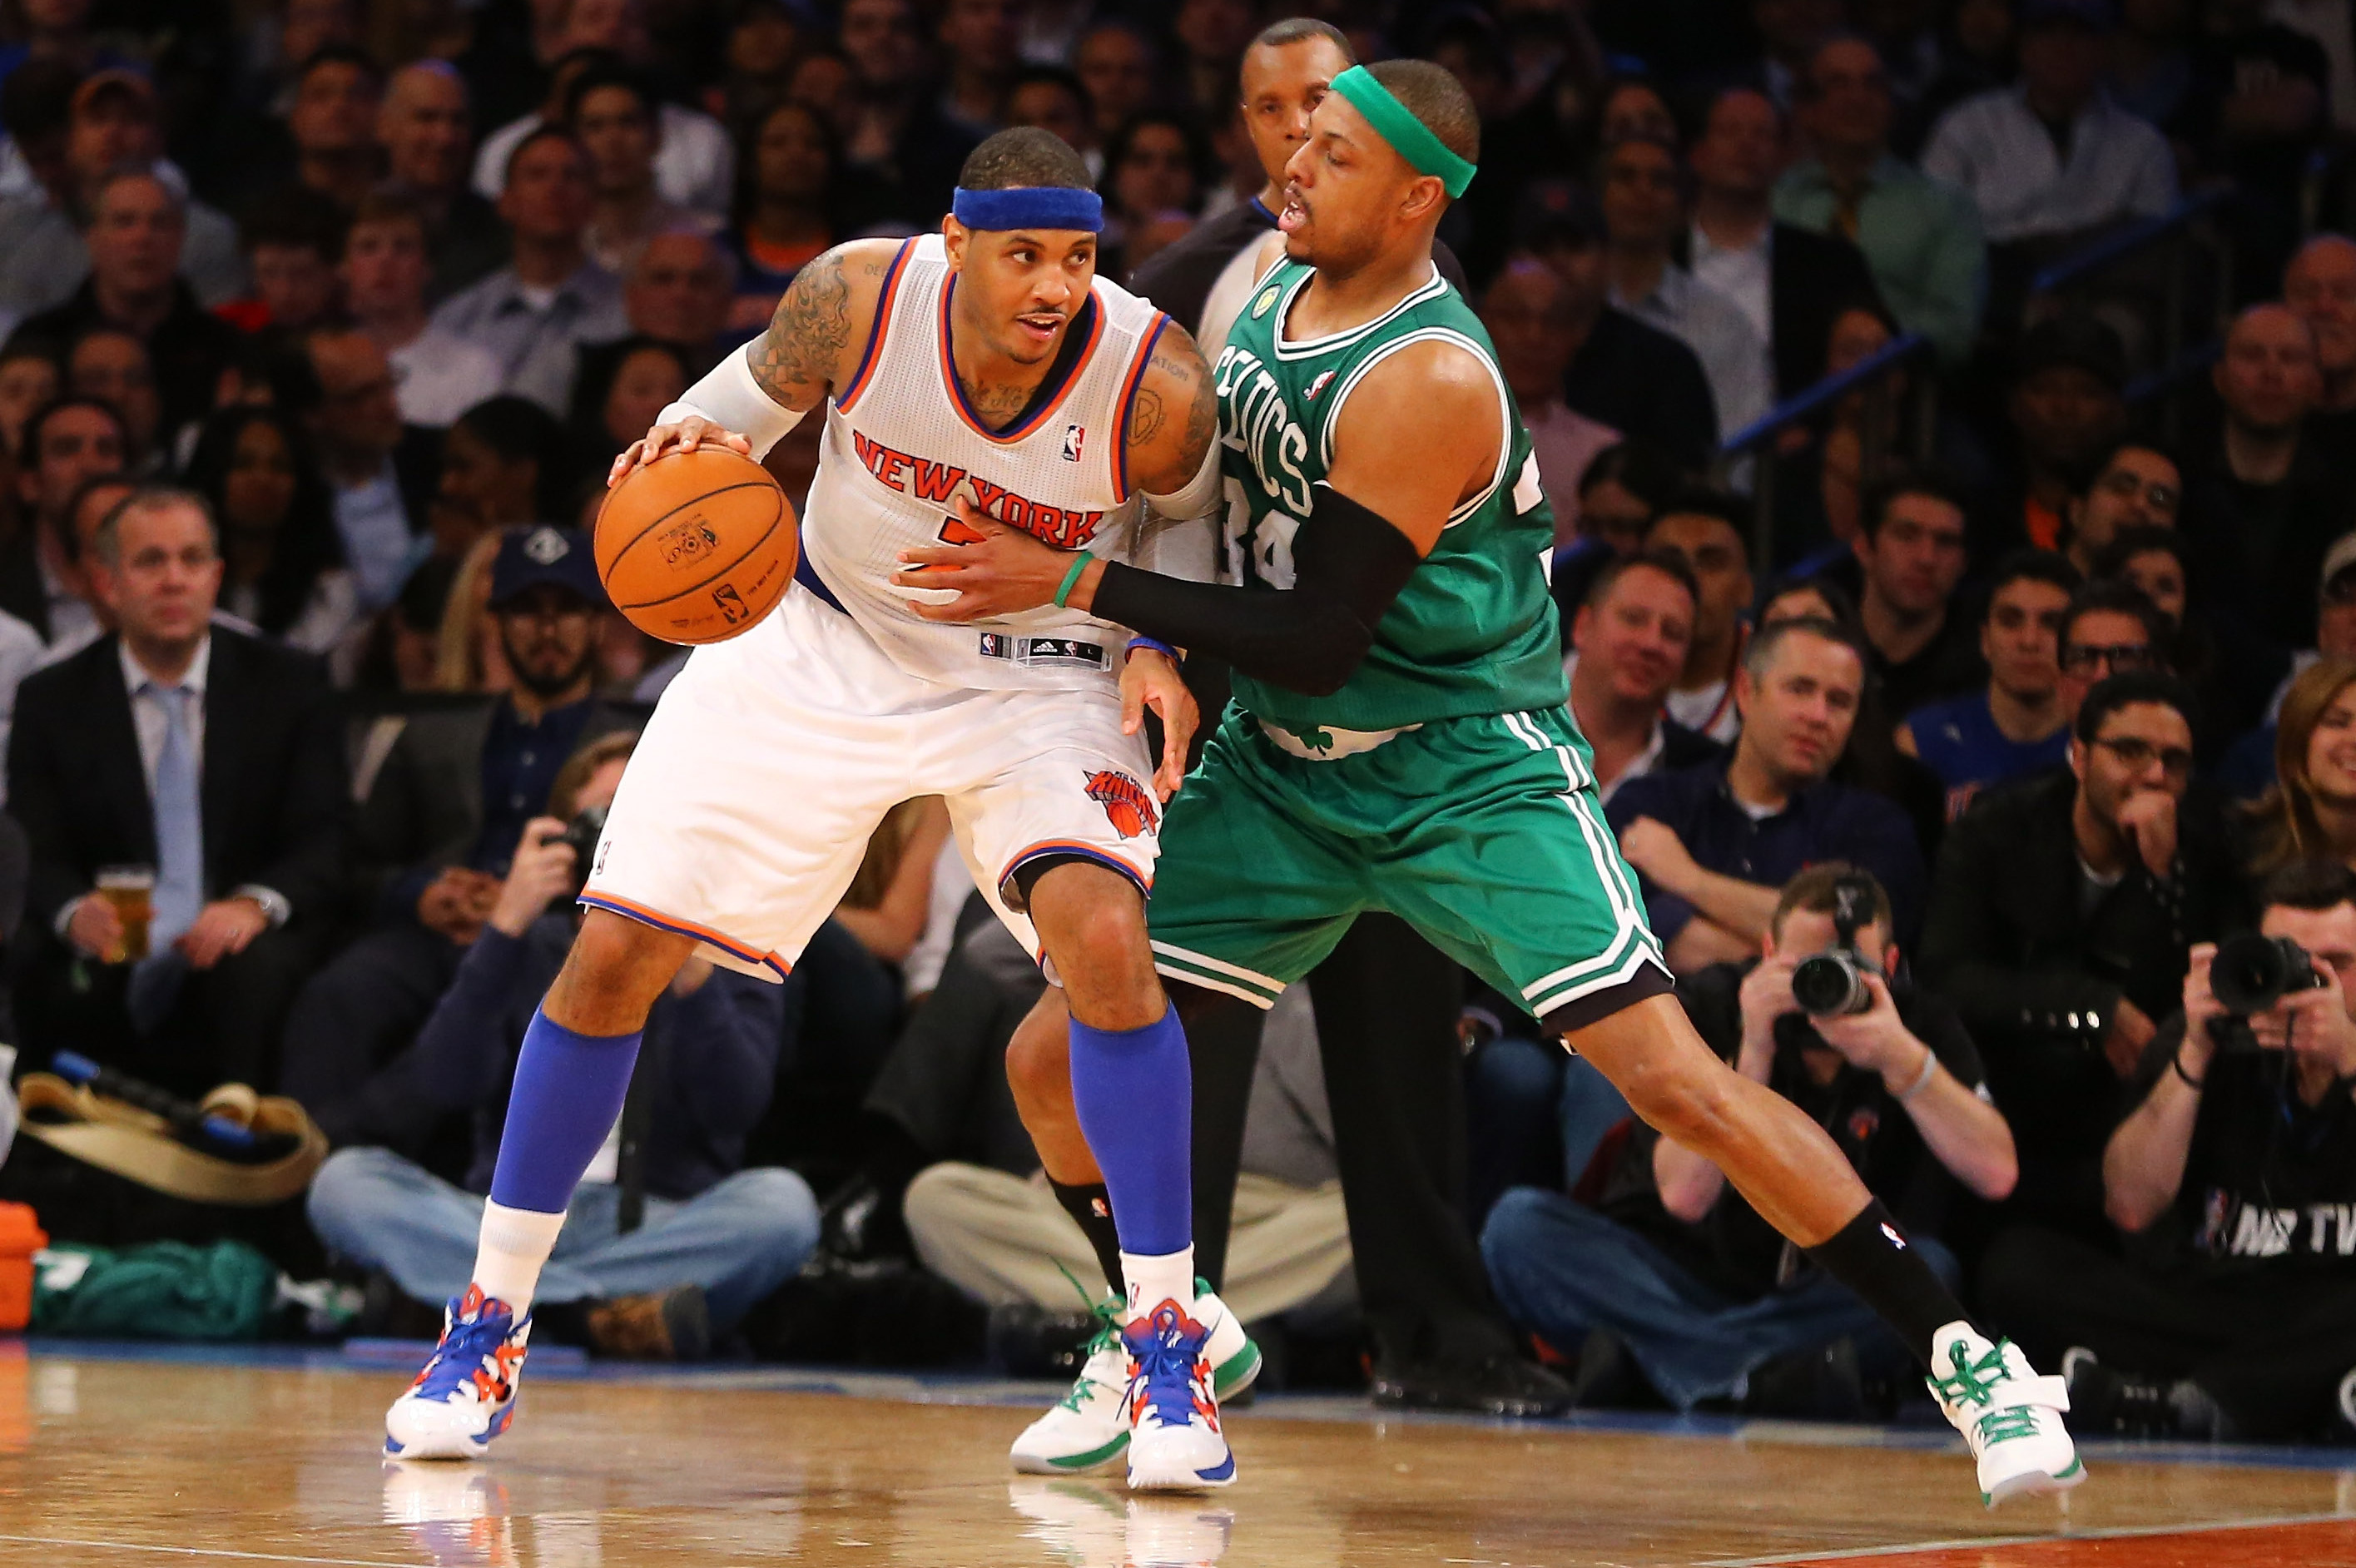 Paul Pierce Compares 2022 Lakers With Carmelo Anthony And Russell